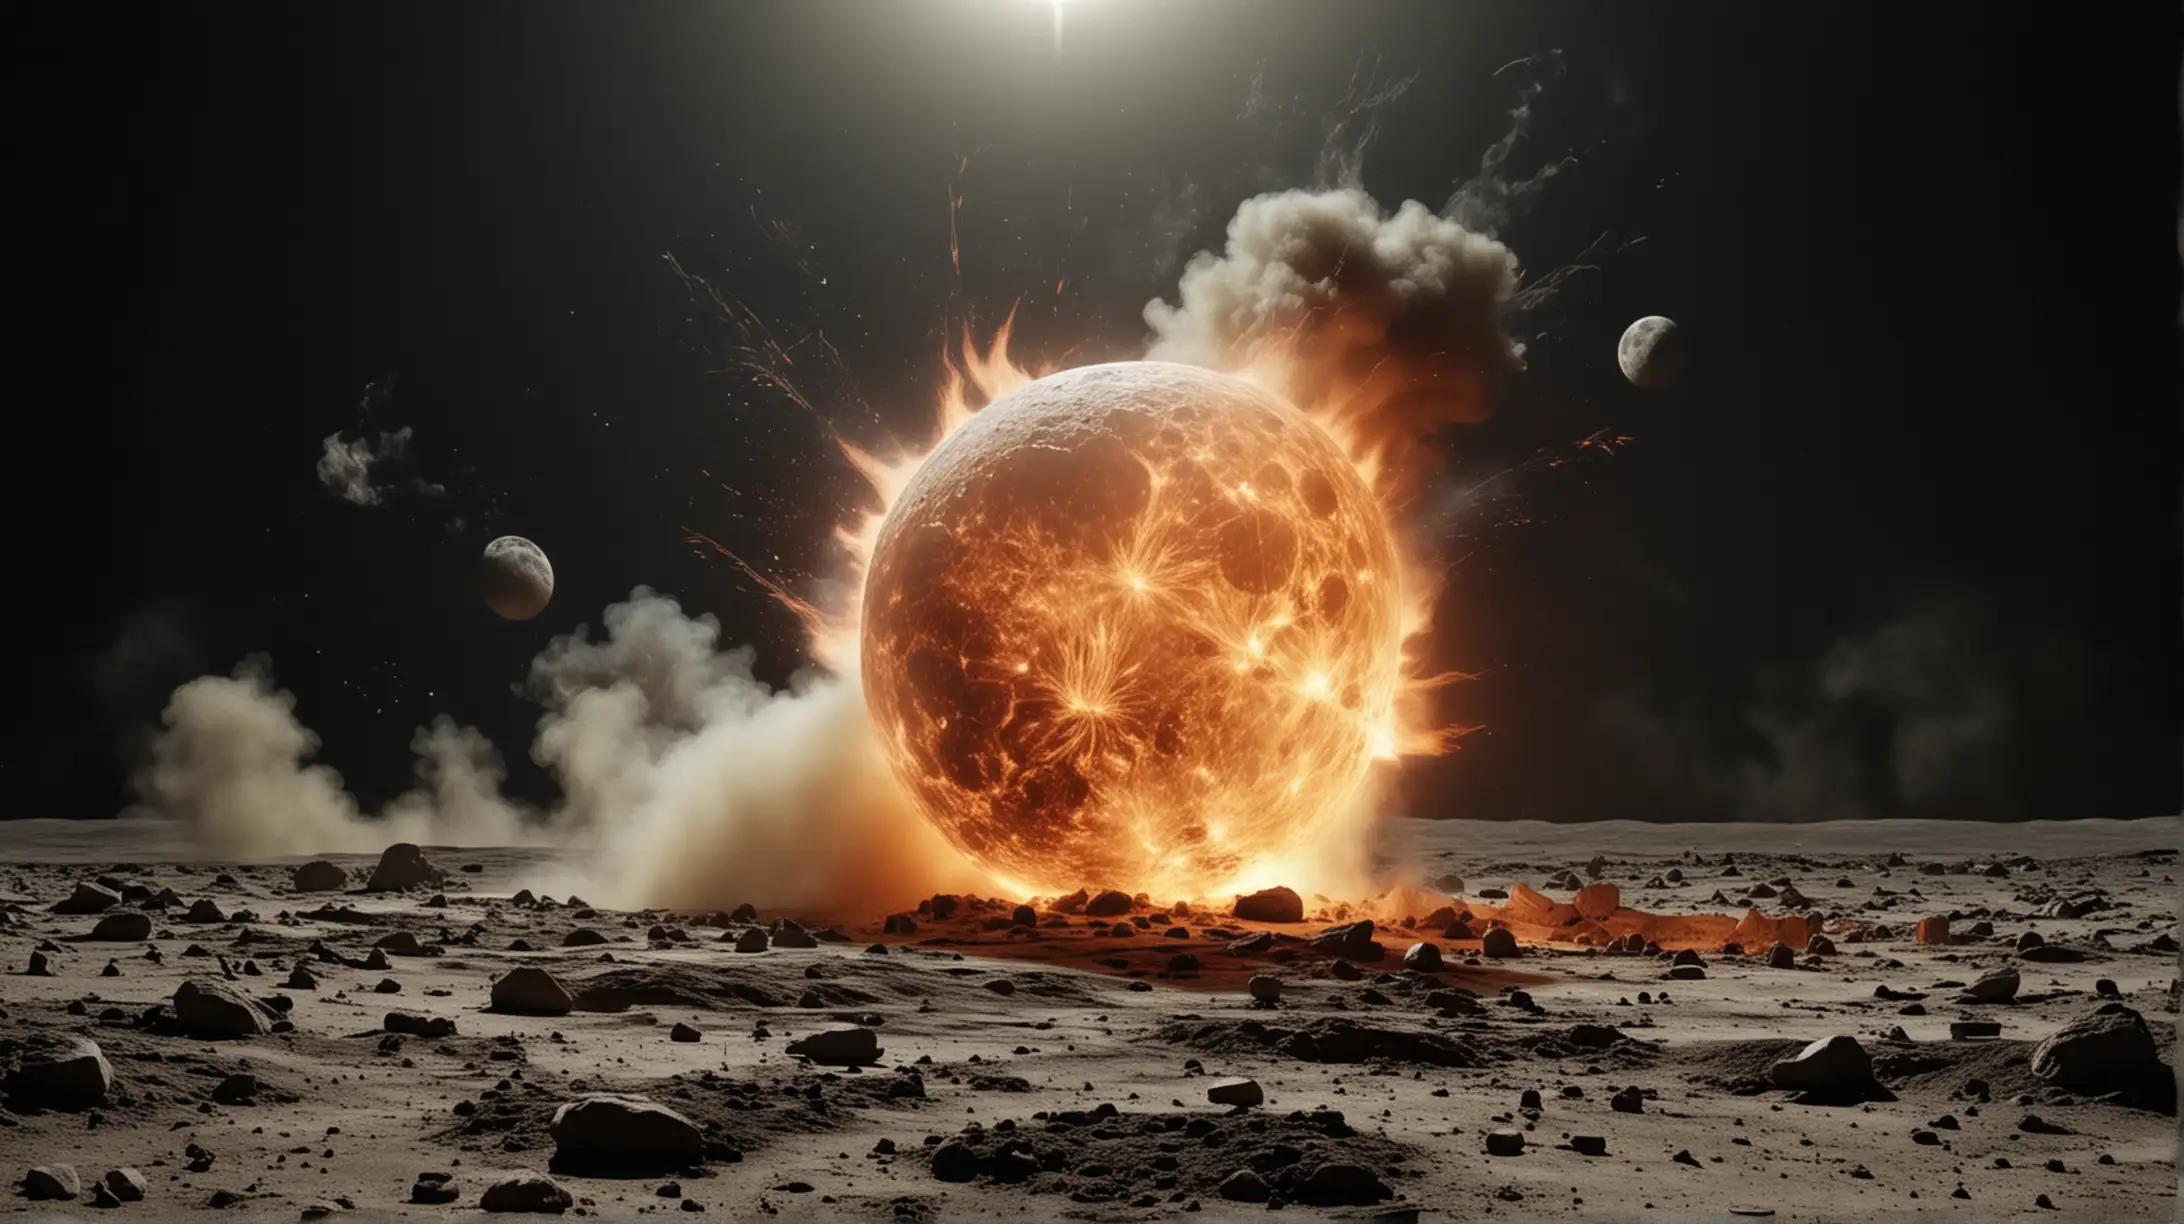 Impact of a Massive Fireball on the Moons Surface